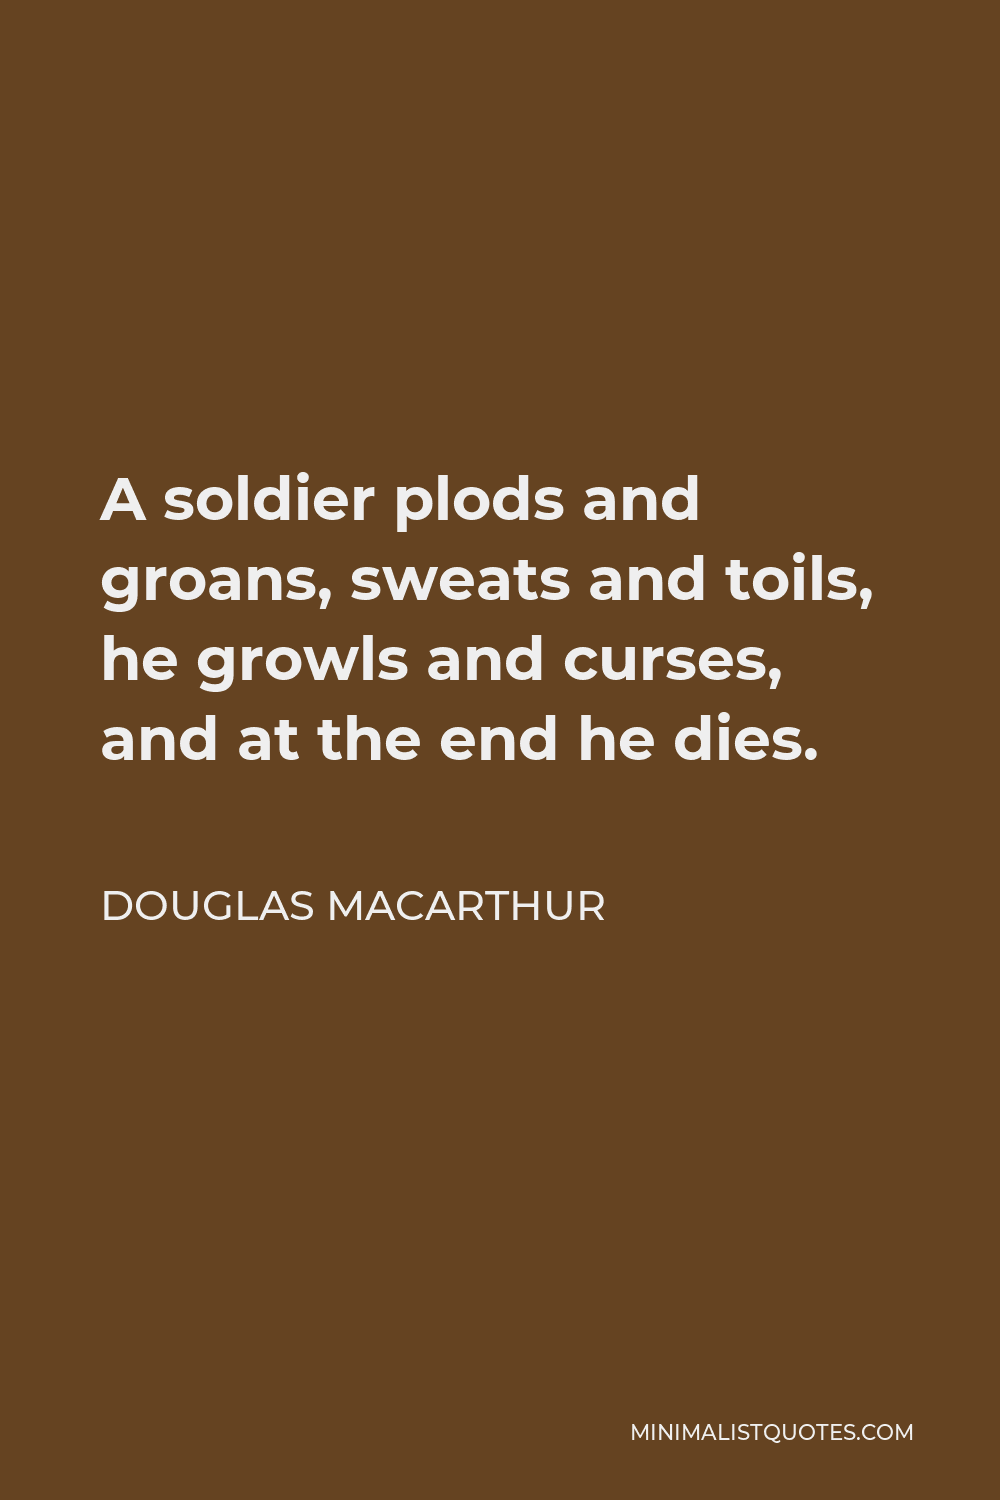 Douglas MacArthur Quote - A soldier plods and groans, sweats and toils, he growls and curses, and at the end he dies.